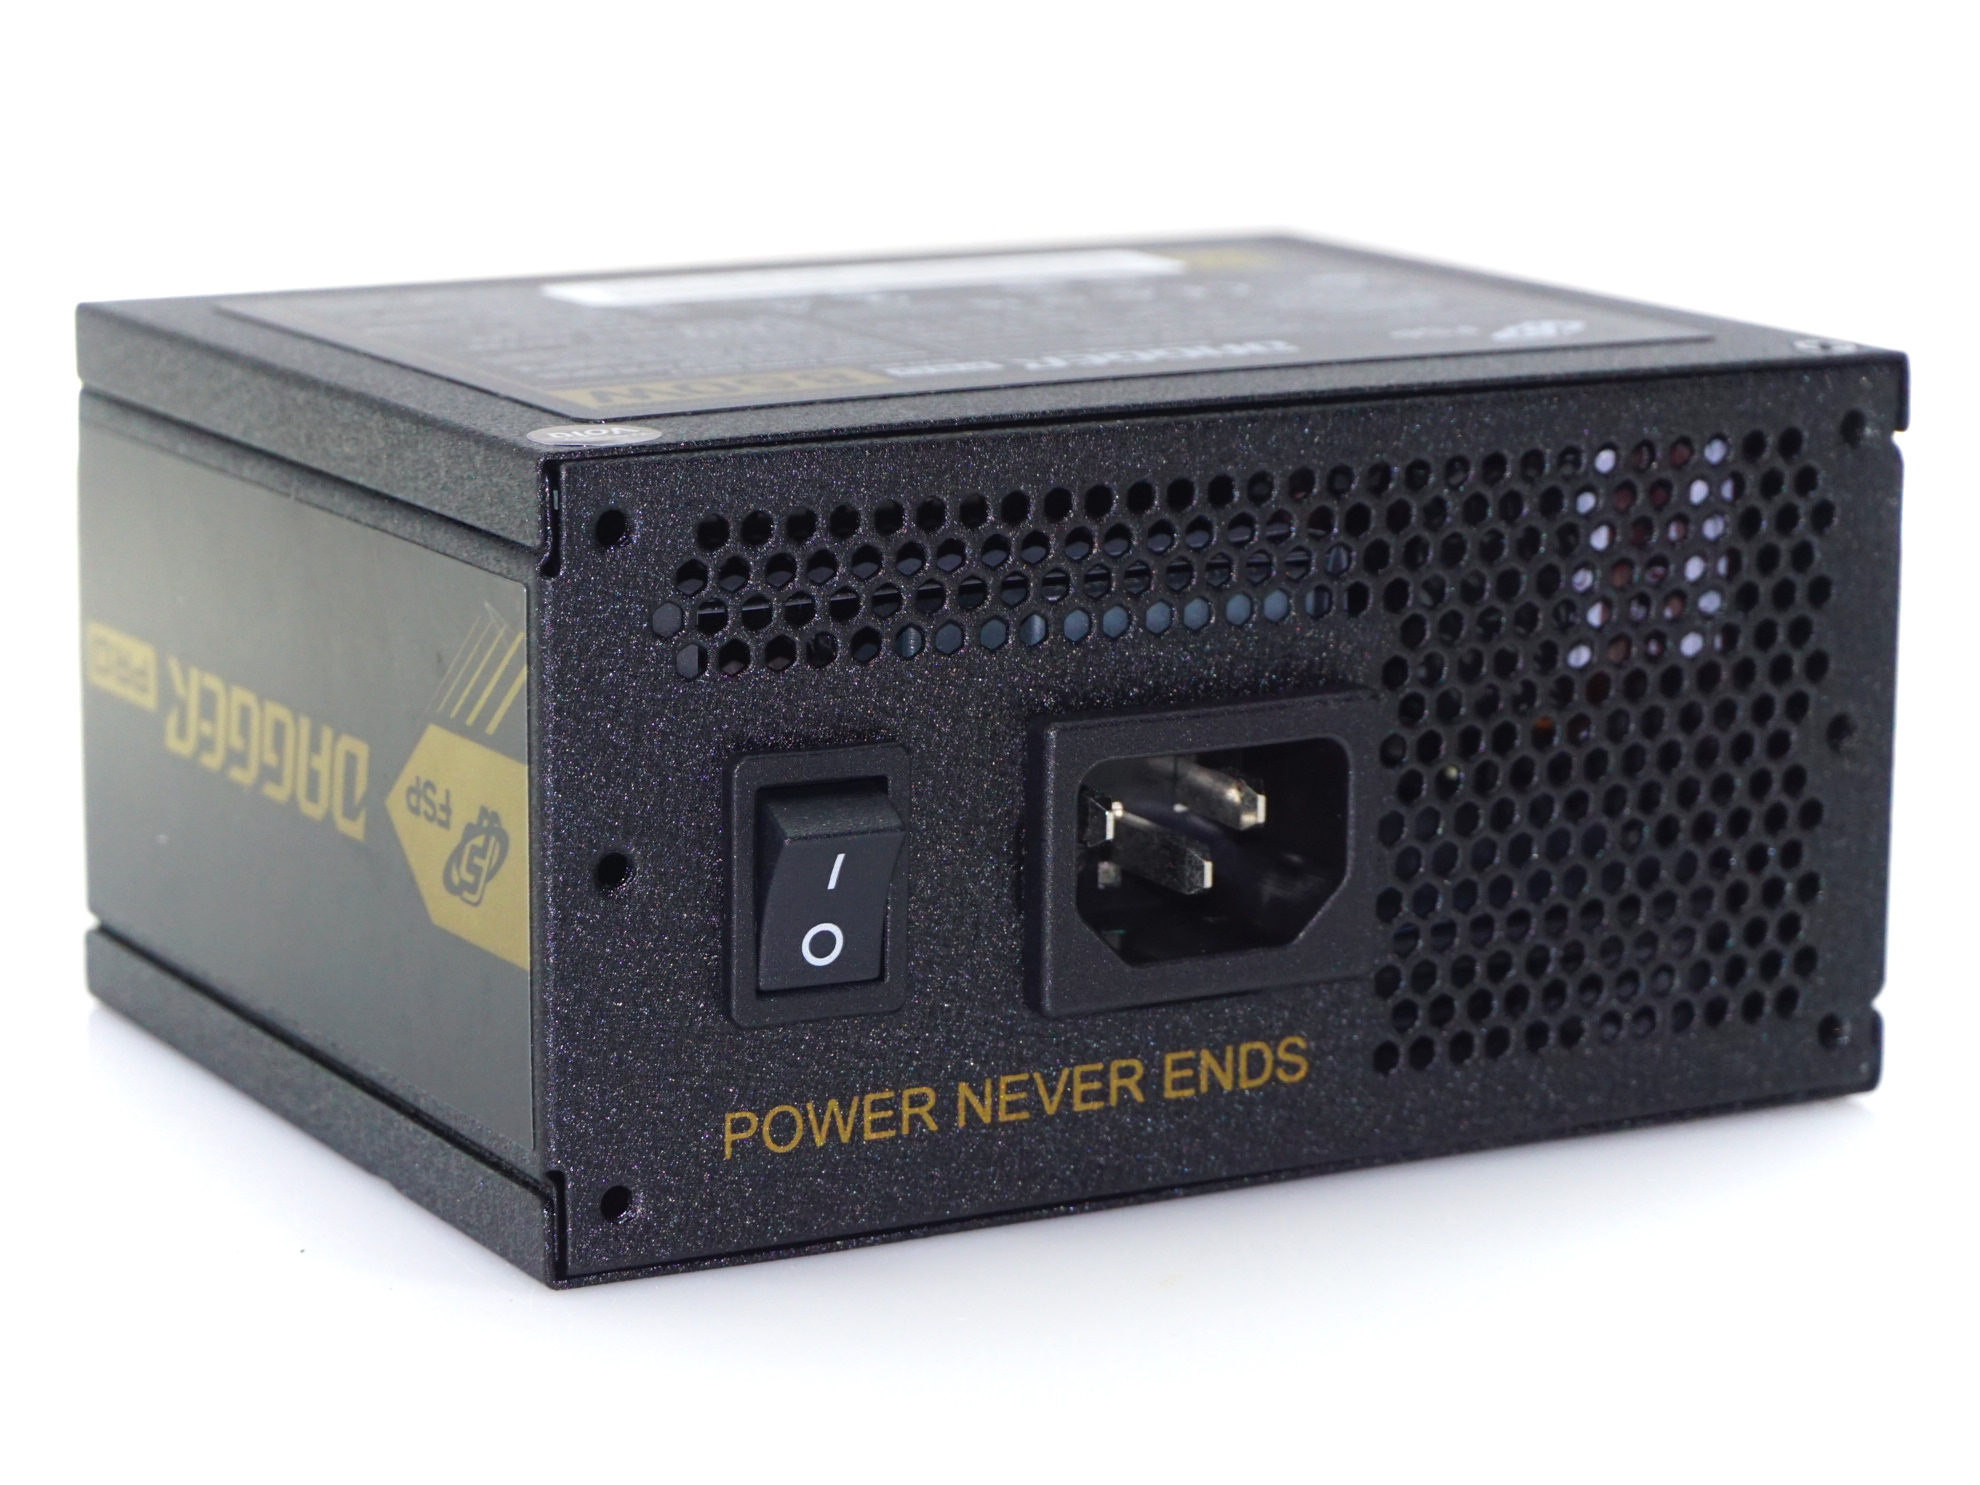 The FSP Dagger Pro SFX 850W PSU Review: Awesome Power in a Small Shell